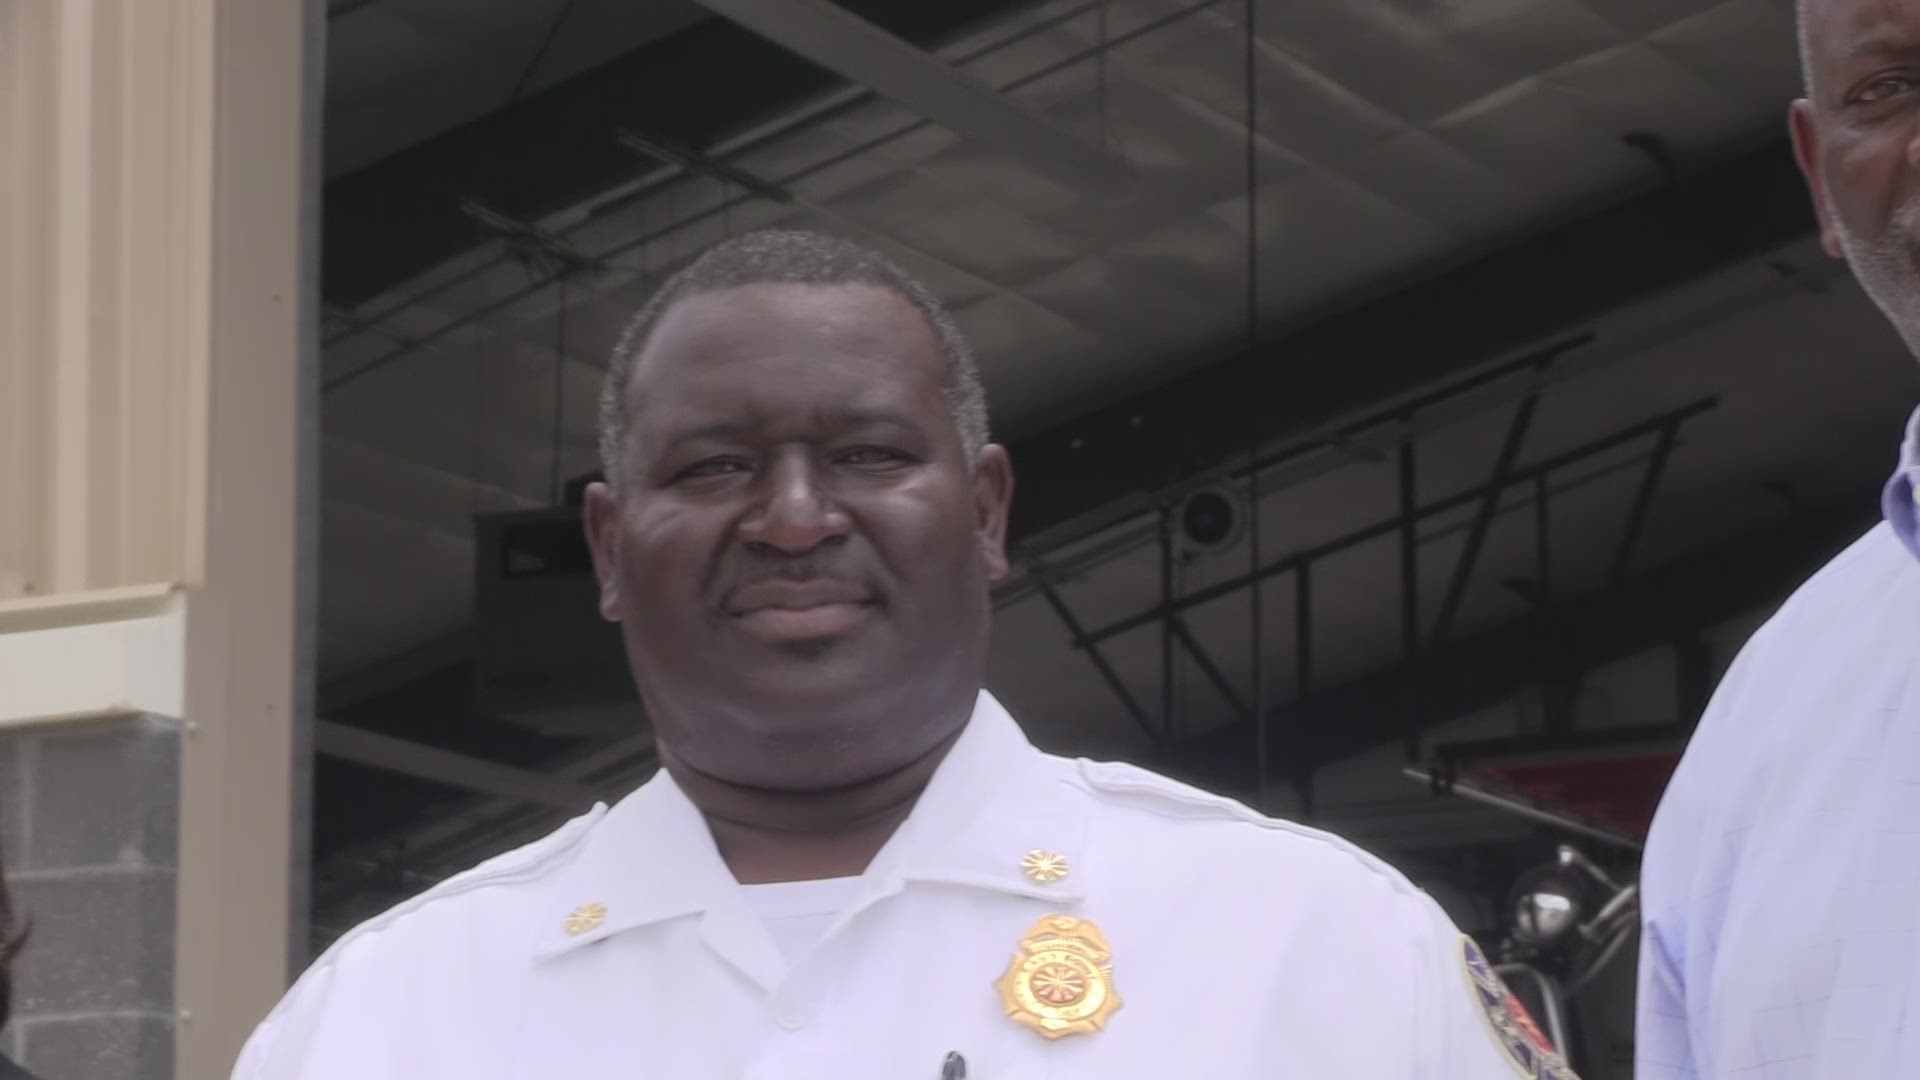 These Fulton County fire chiefs didn't just make a difference, they made history